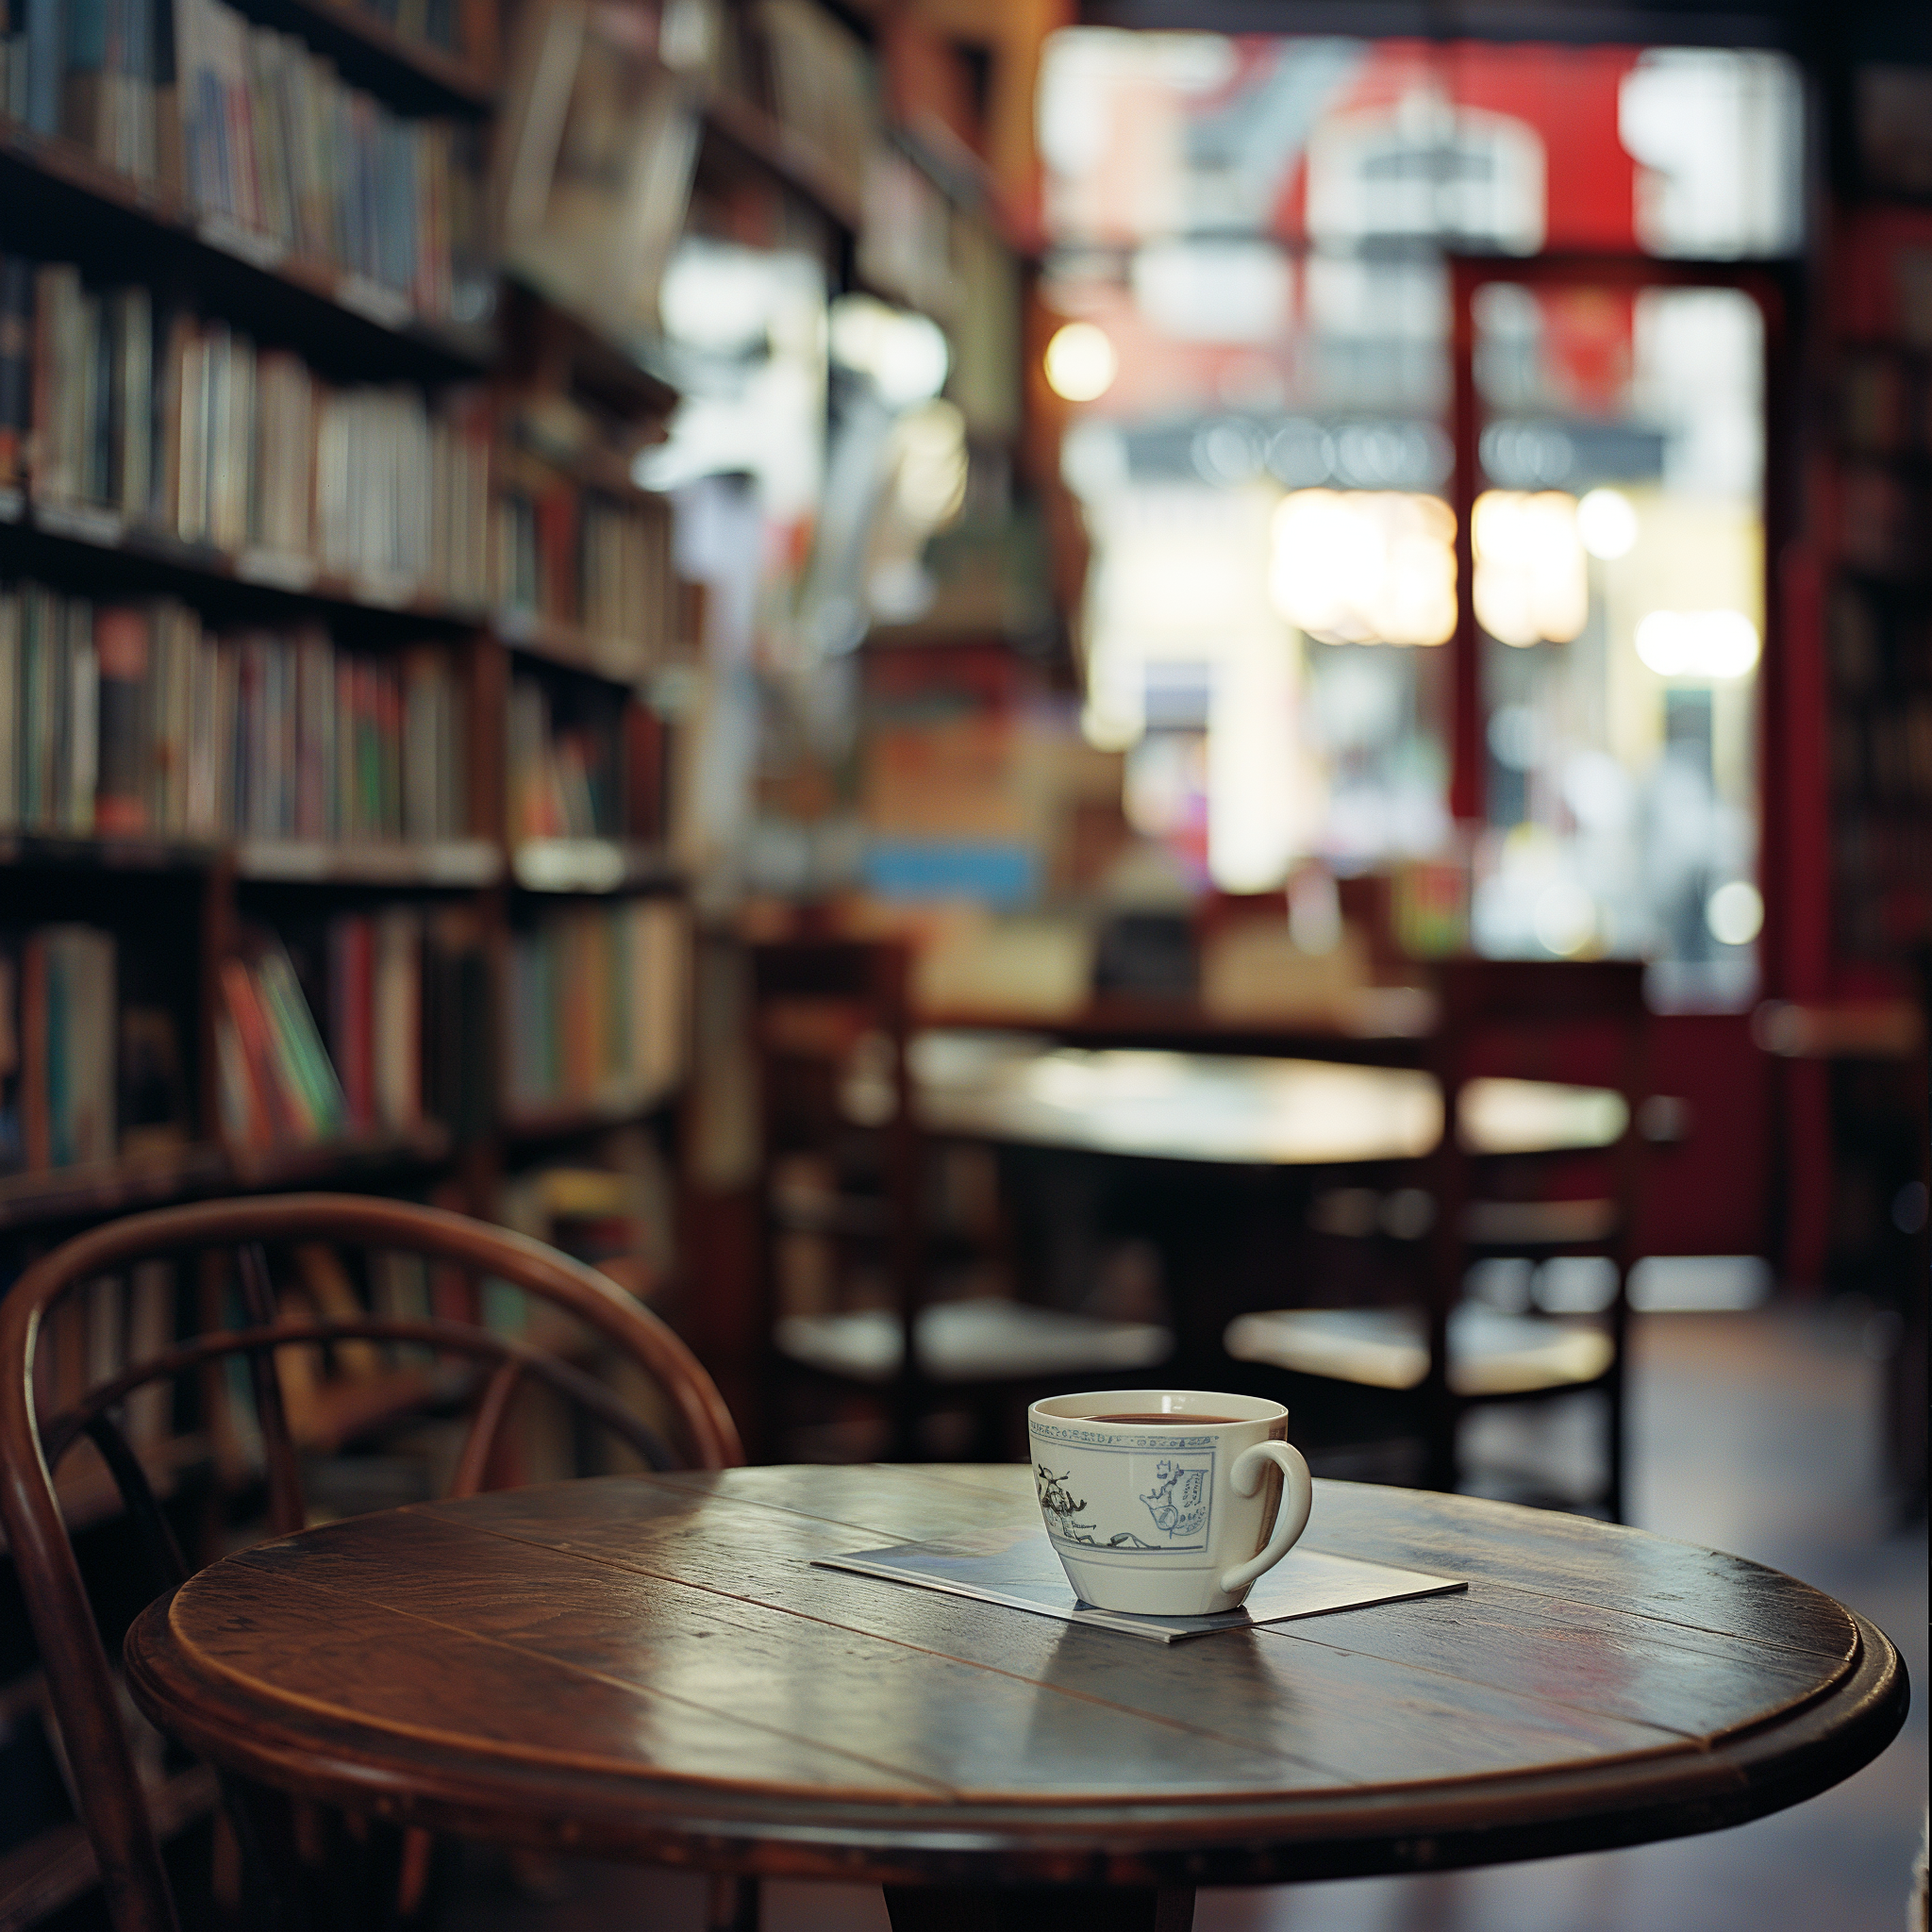 A cup on a table in a coffee shop | Source: Midjourney